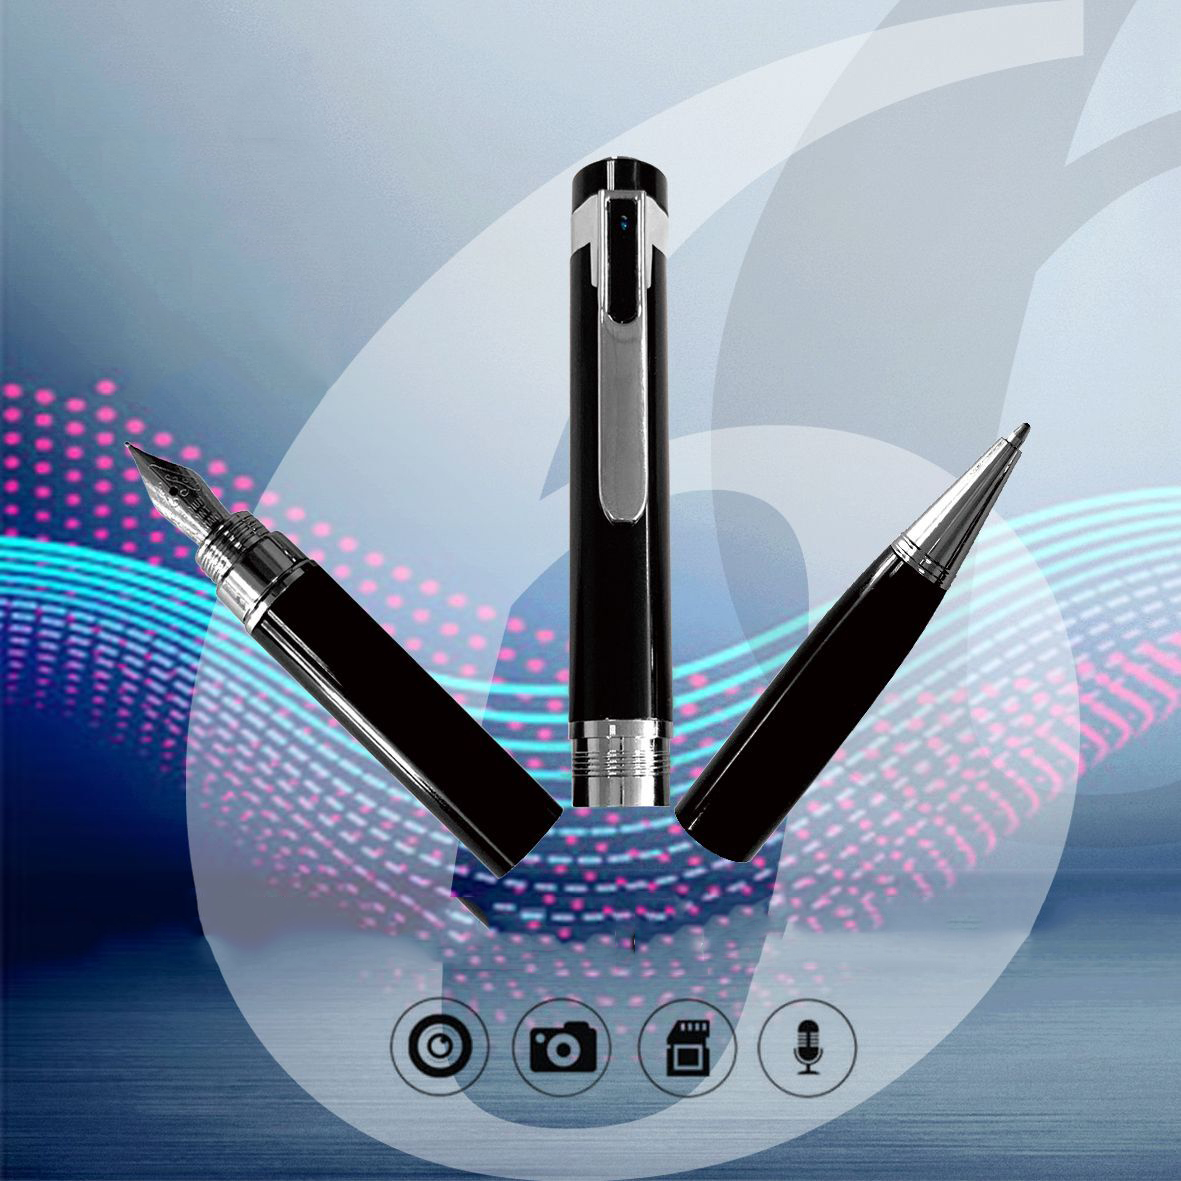 

W6 Camera Pen Audio And Video Recorder For Conference & Lecture HD 1080P